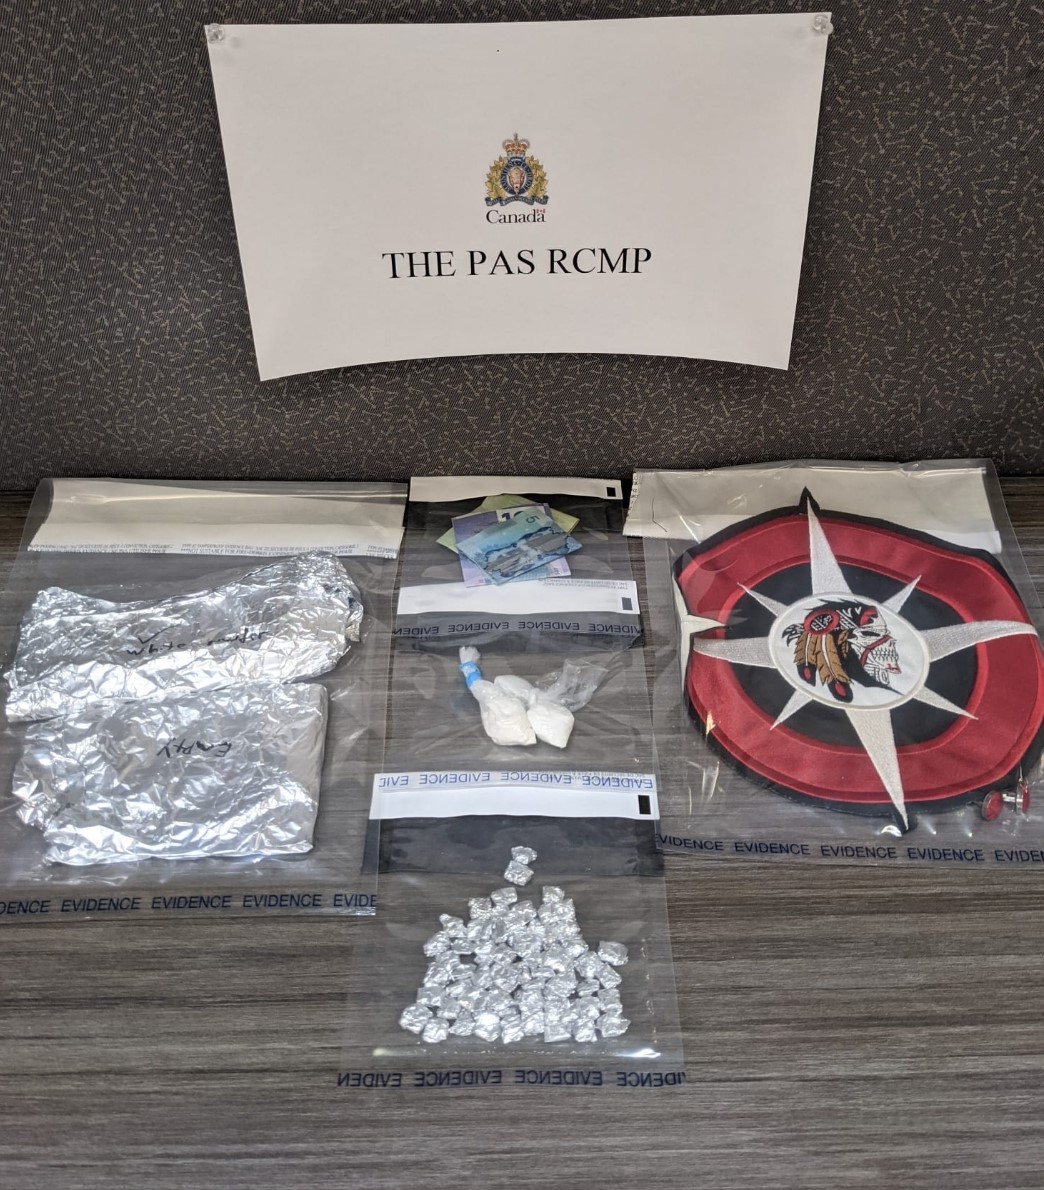 Contraband seized by The Pas RCMP.